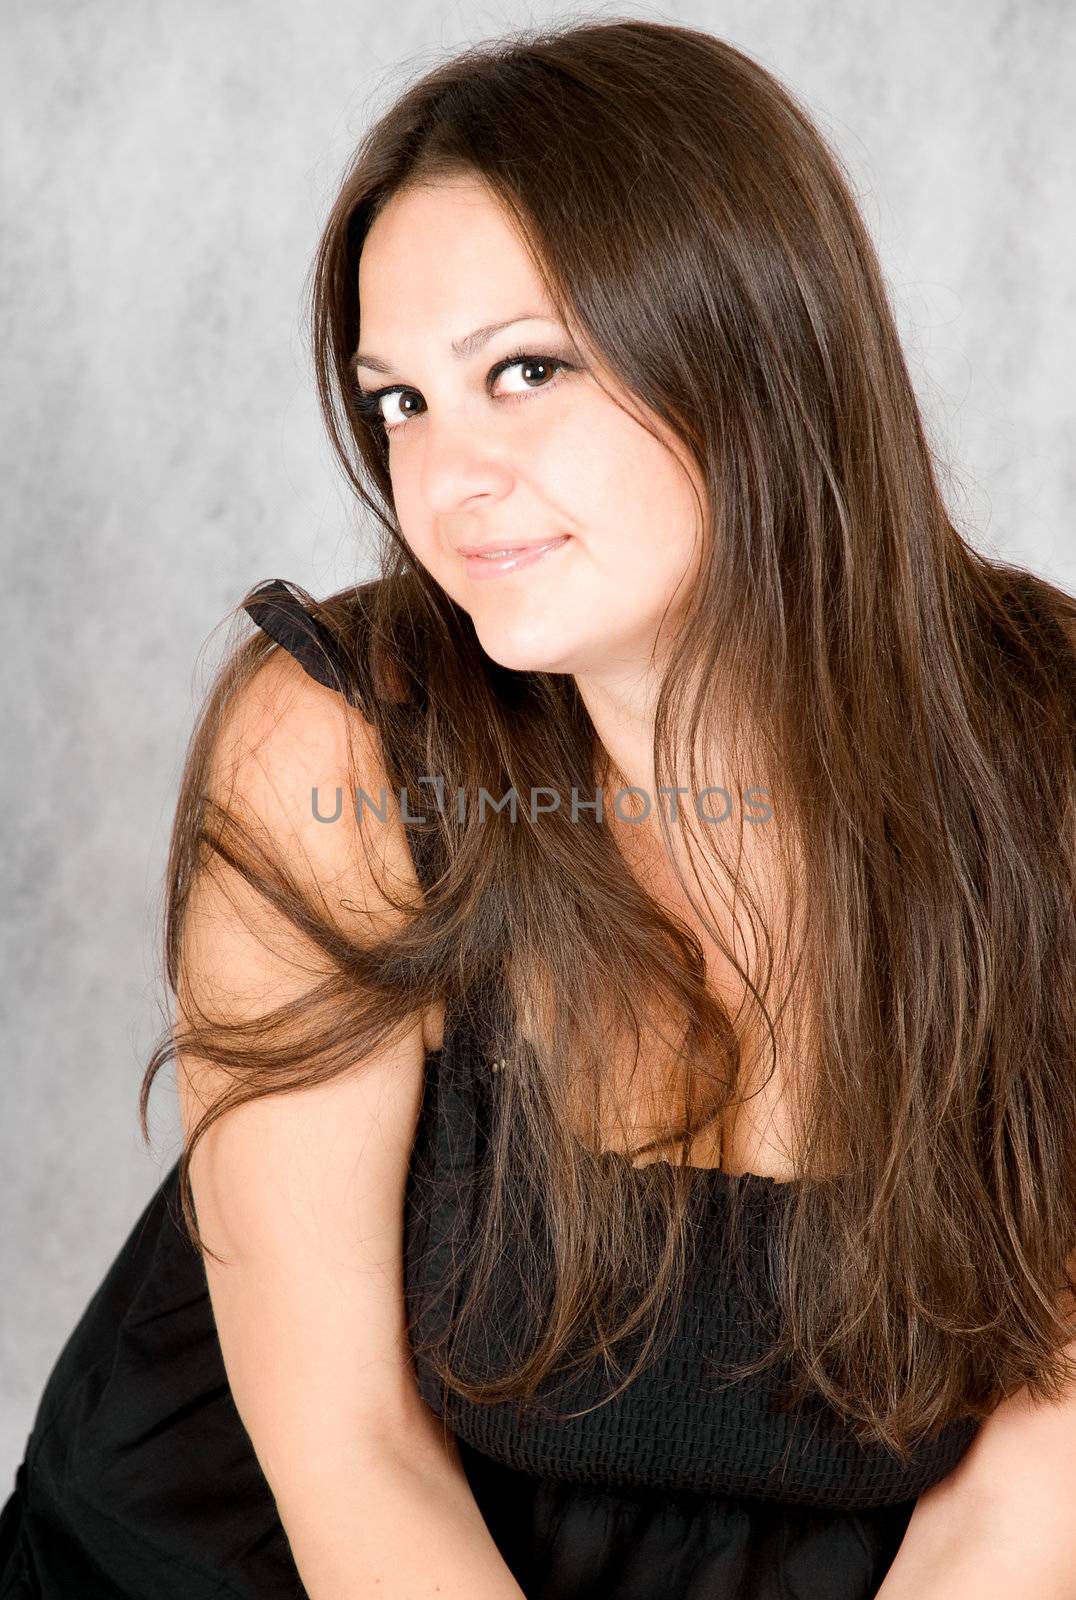 smiling young woman with long brown hair watching